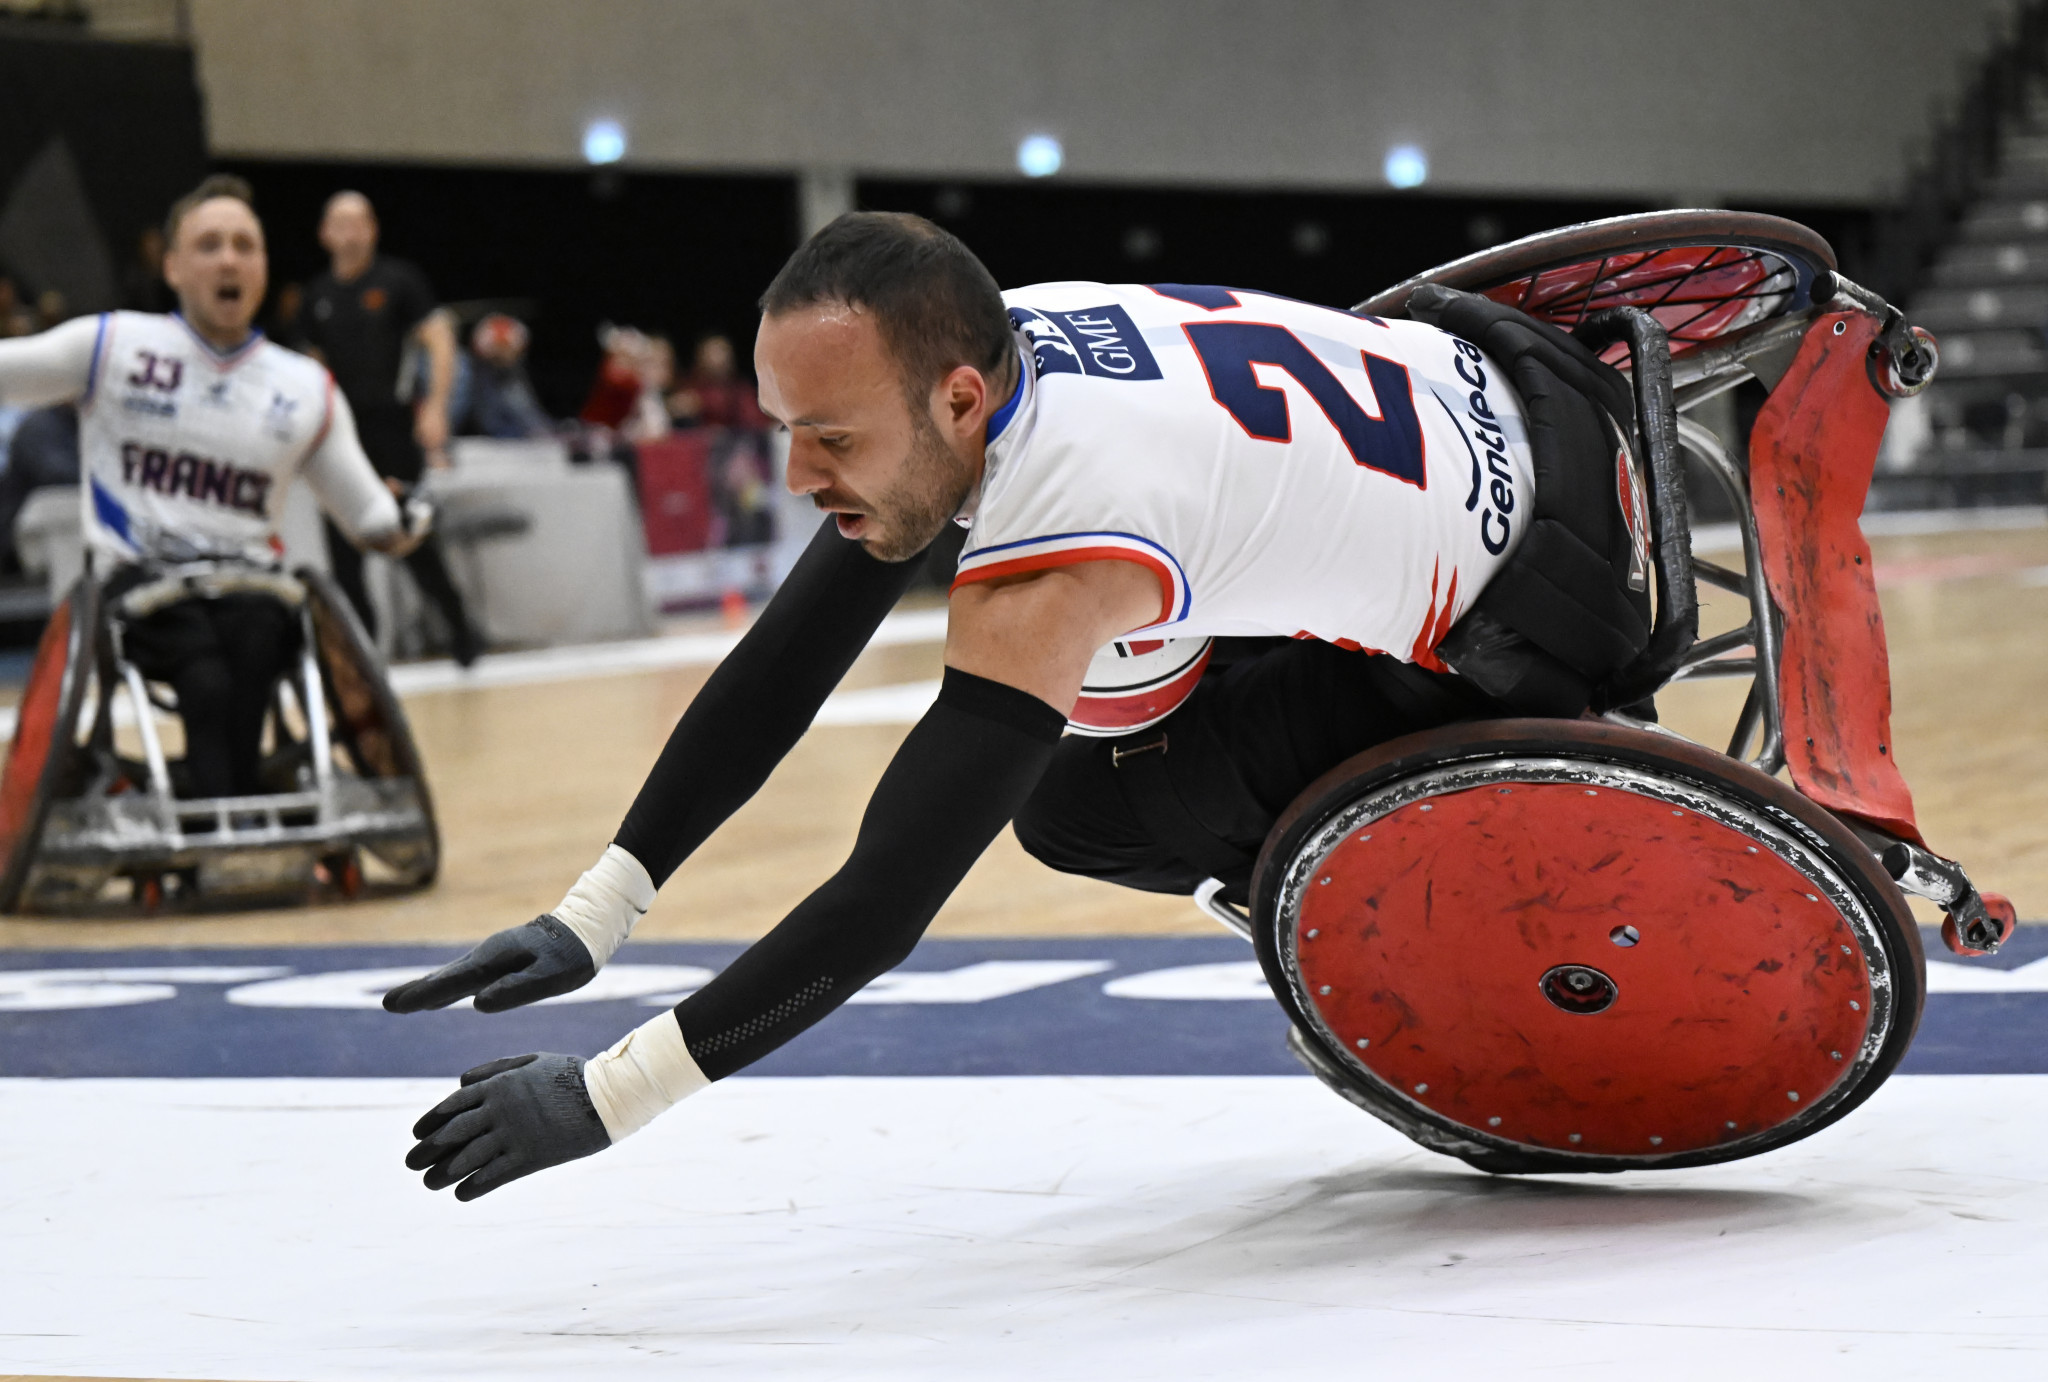 France staged two late comebacks but could not manage a third in overtime ©Lars Møller/Parasport Denmark